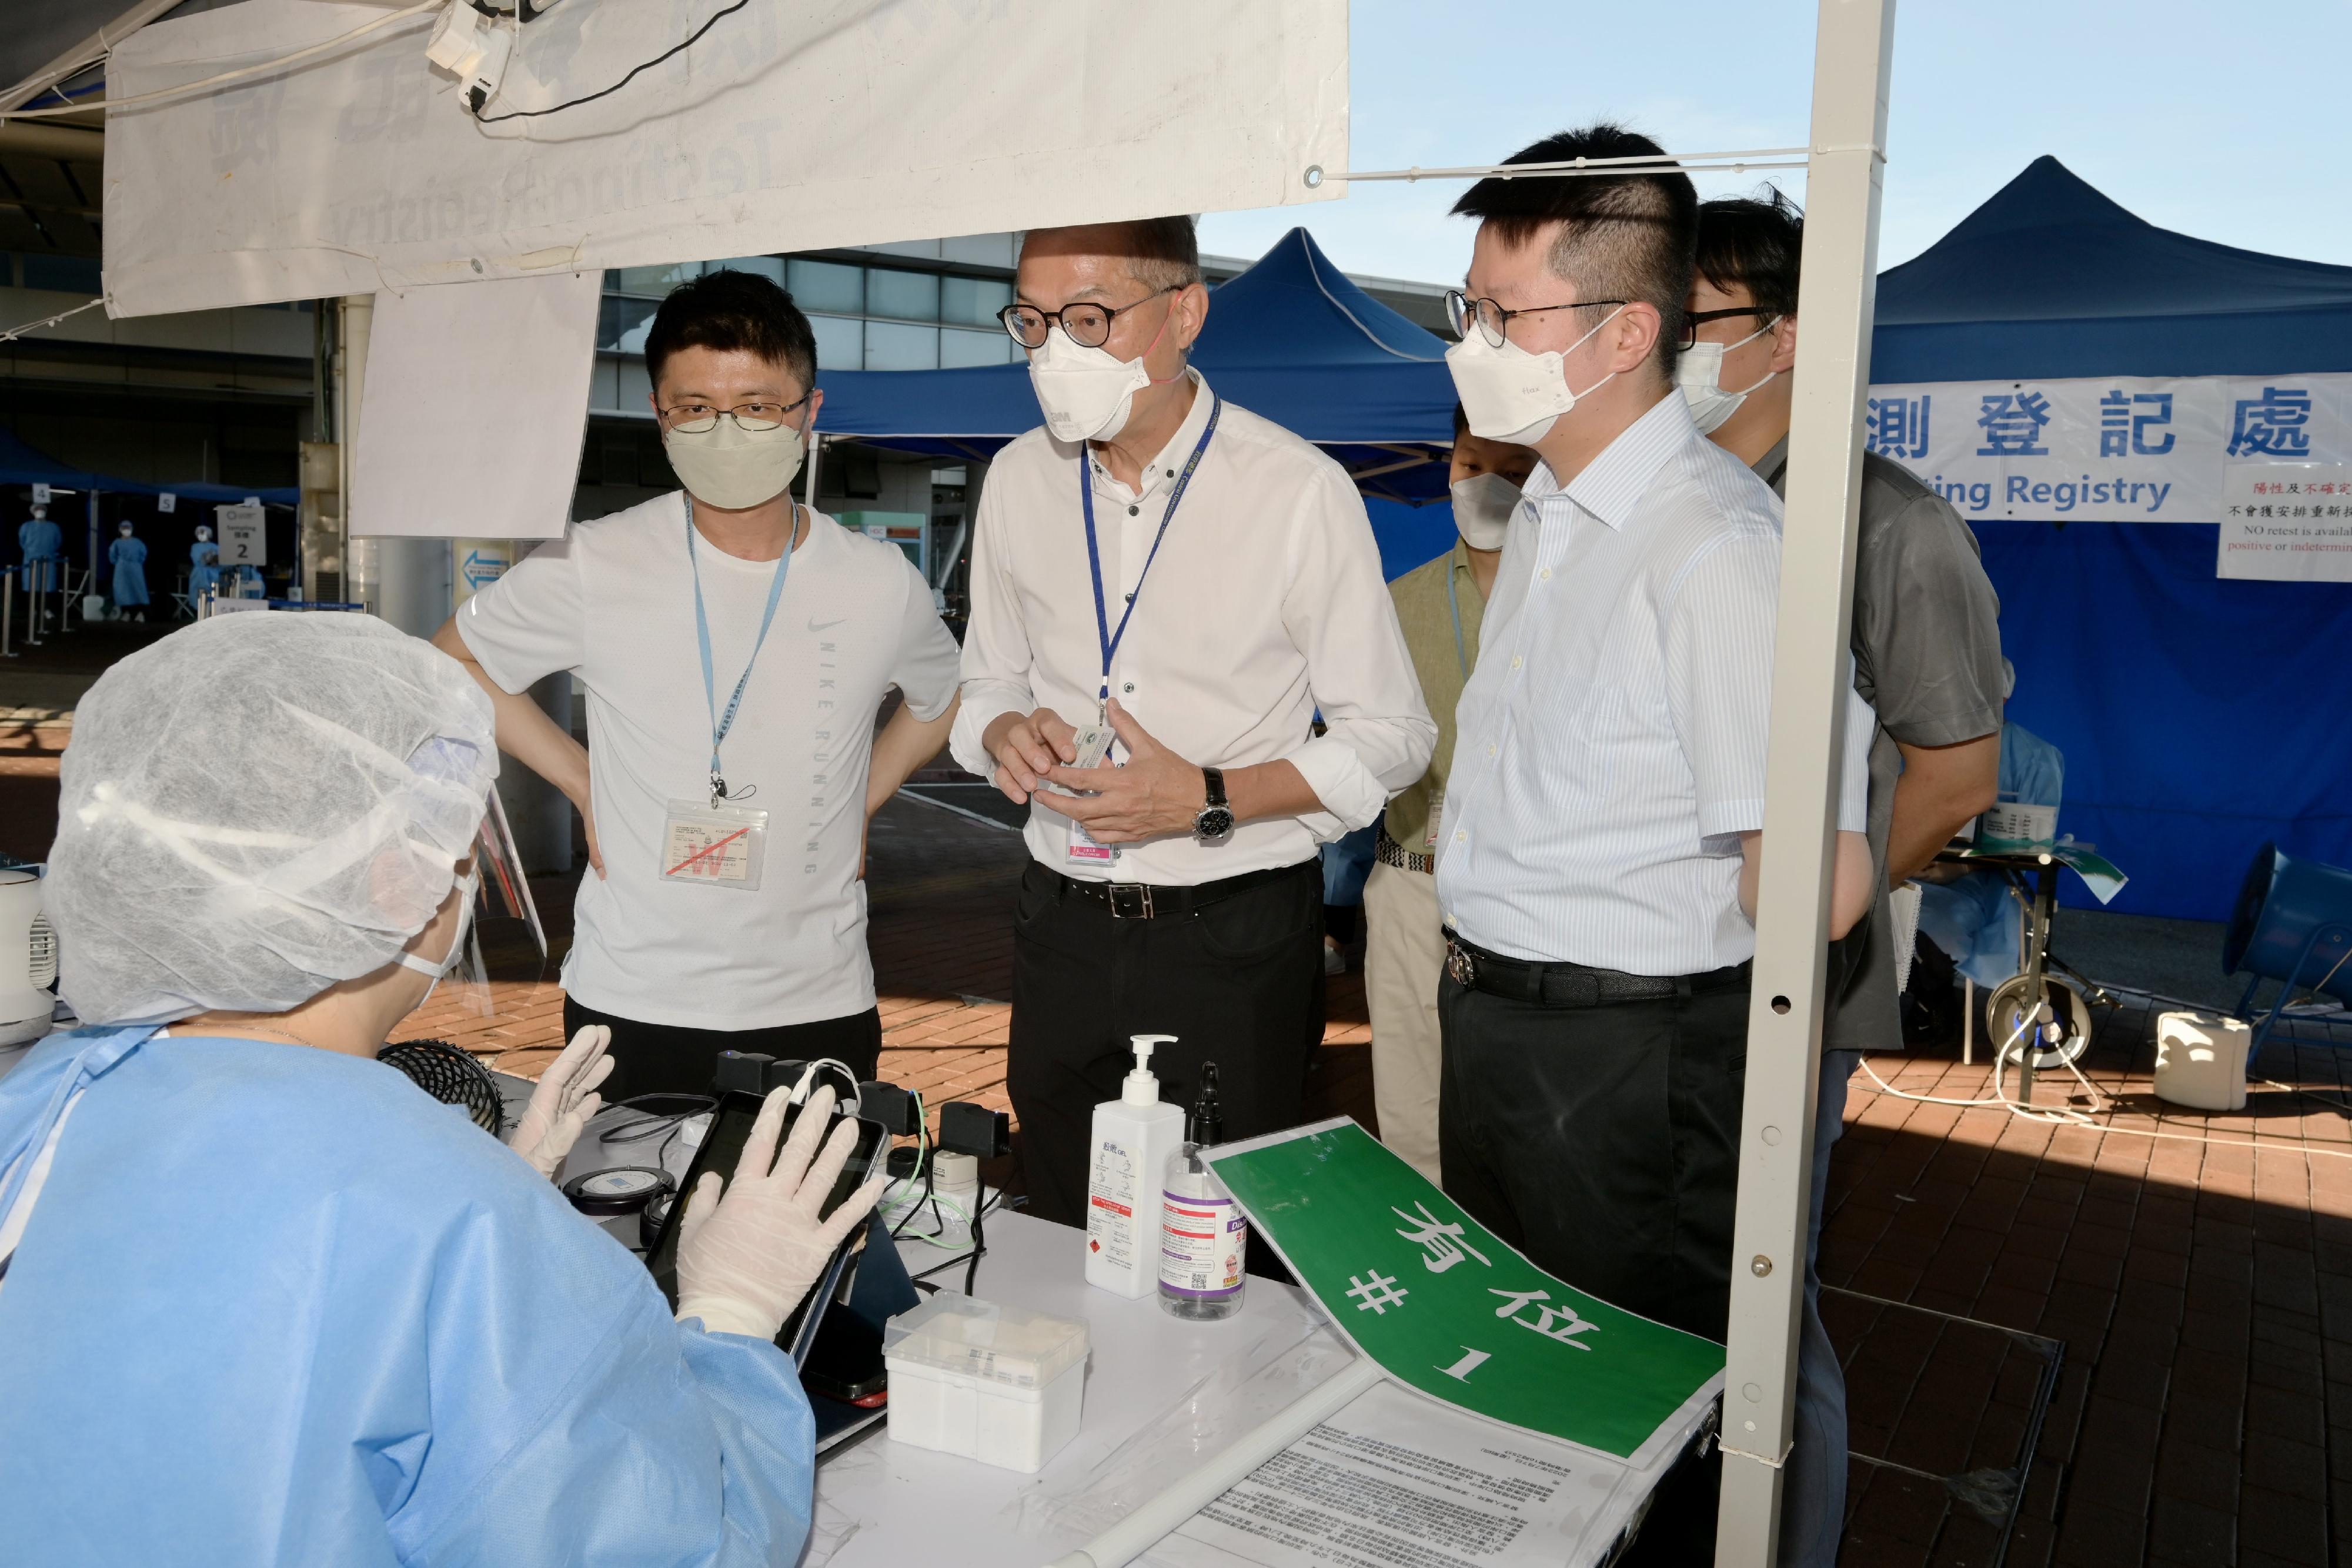 The Secretary for Health, Professor Lo Chung-mau (second left), went to the Shenzhen Bay Control Point today (July 10) to learn about the workflow for special nucleic acid testing before departure from frontline staff in the company of the Chief Port Health Officer of the Centre for Health Protection of the Department of Health, Dr Leung Yiu-hong (first left).